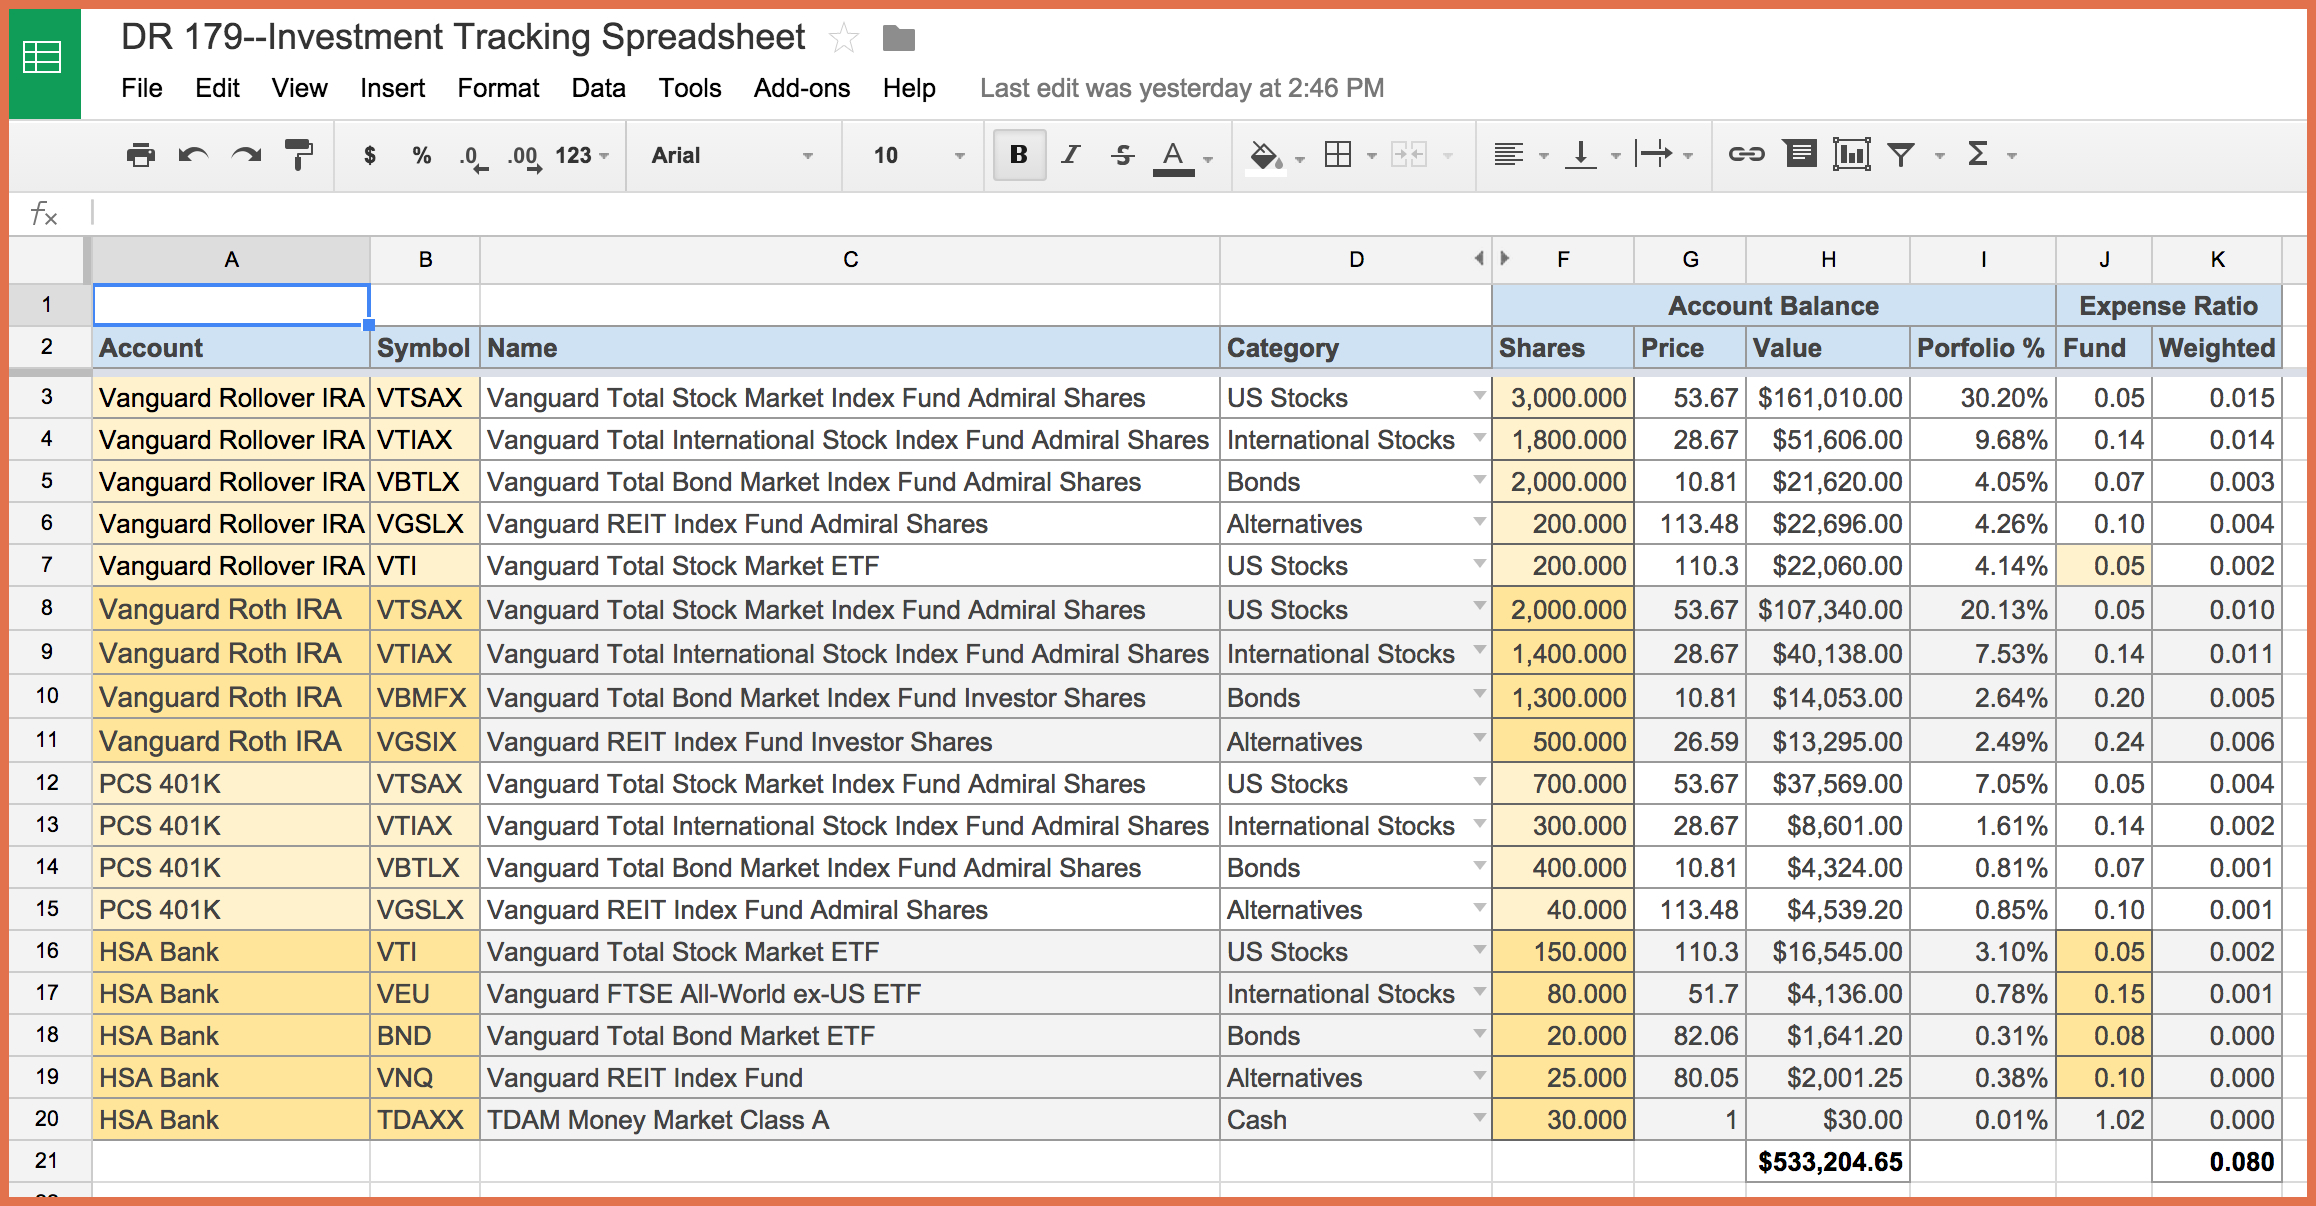 Credit Card Tracking Spreadsheet With Regard To Credit Card Payment Tracking Spreadsheet 2018 Spreadsheet Templates